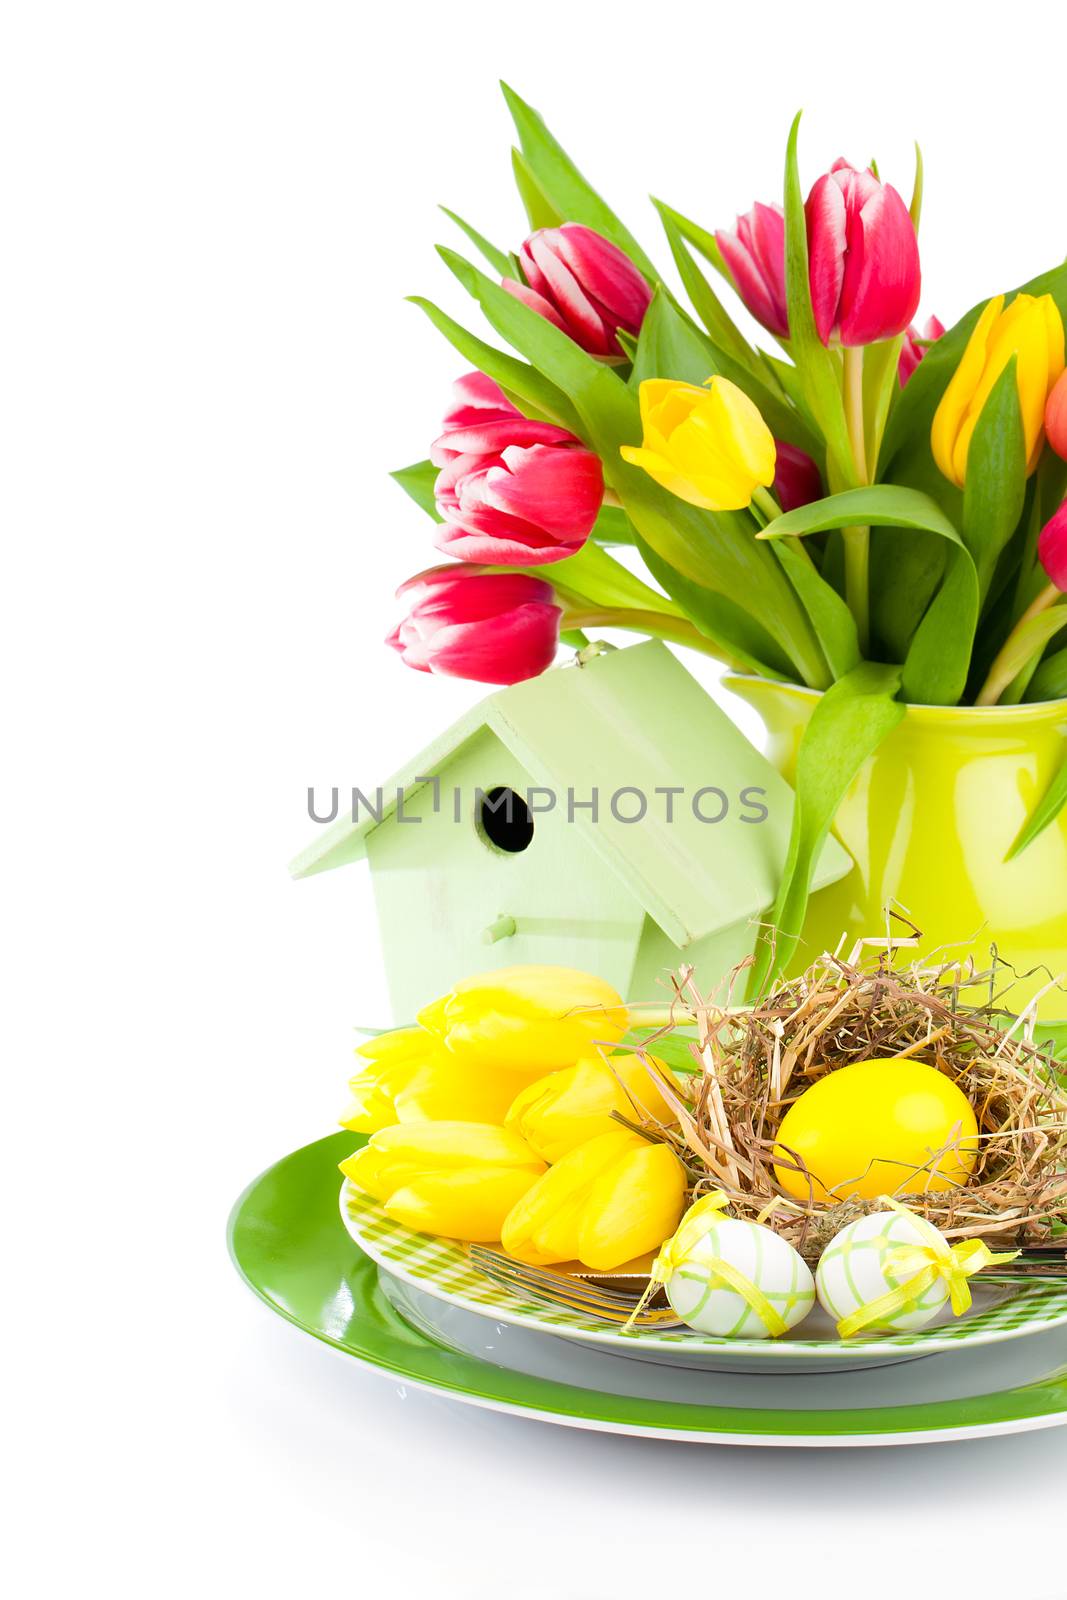 Easter eggs with tulips flowers and birdhouse, on a white background